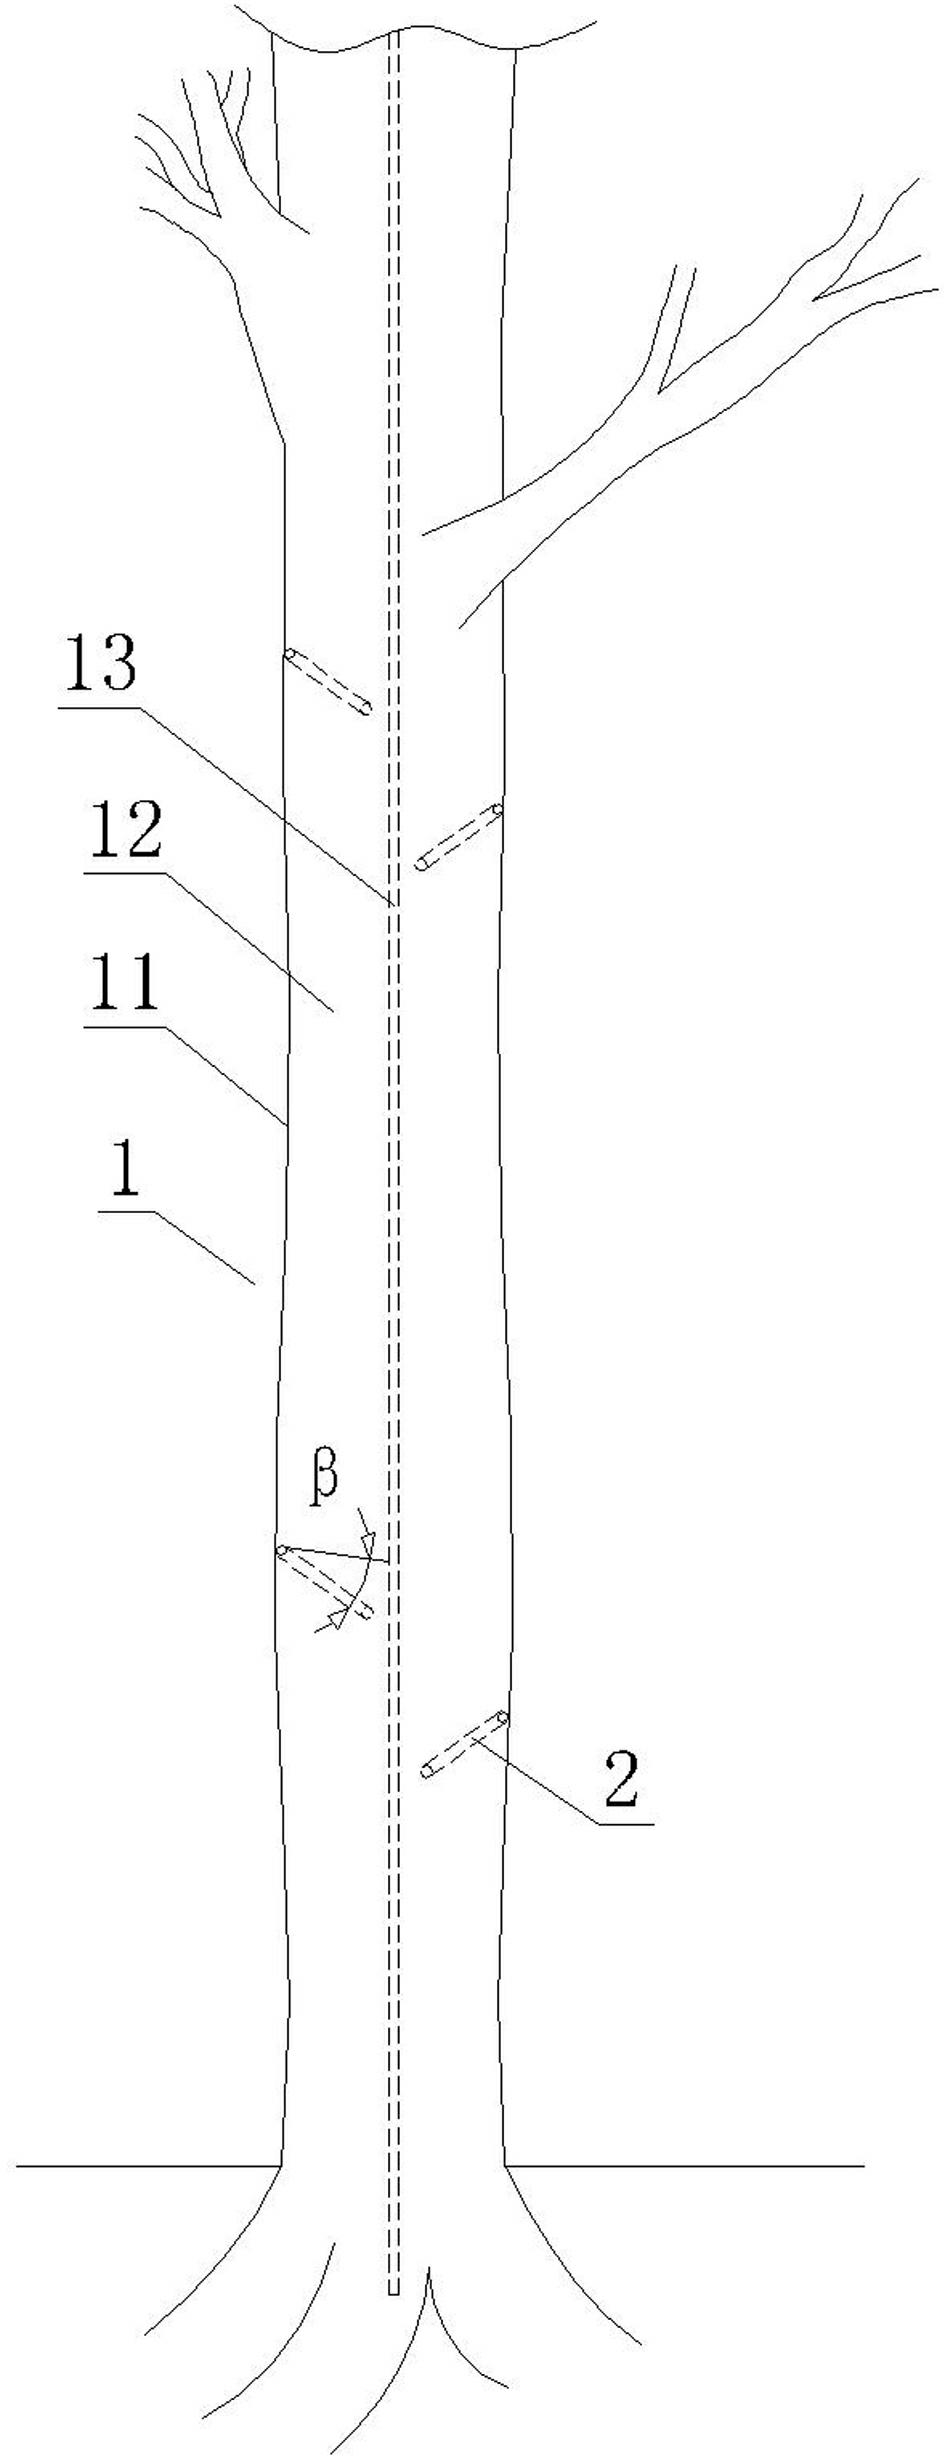 Method for producing agilawood on aquilaria plant by eccentric perfusion method and scent gland activator